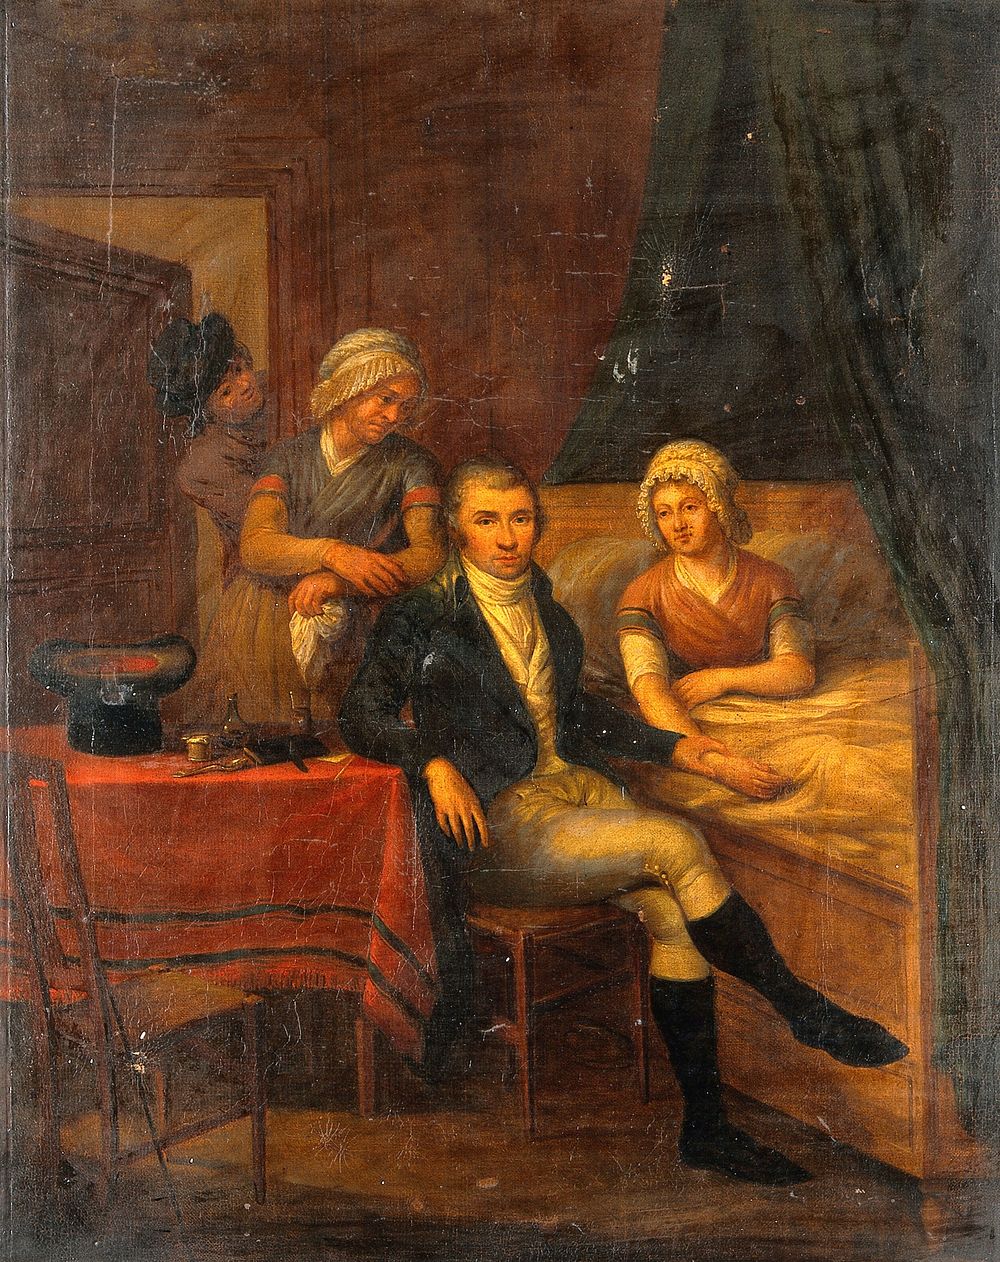 A physician taking the pulse of a woman who sits in bed, in the presence of two other figures. Oil painting by L.B.